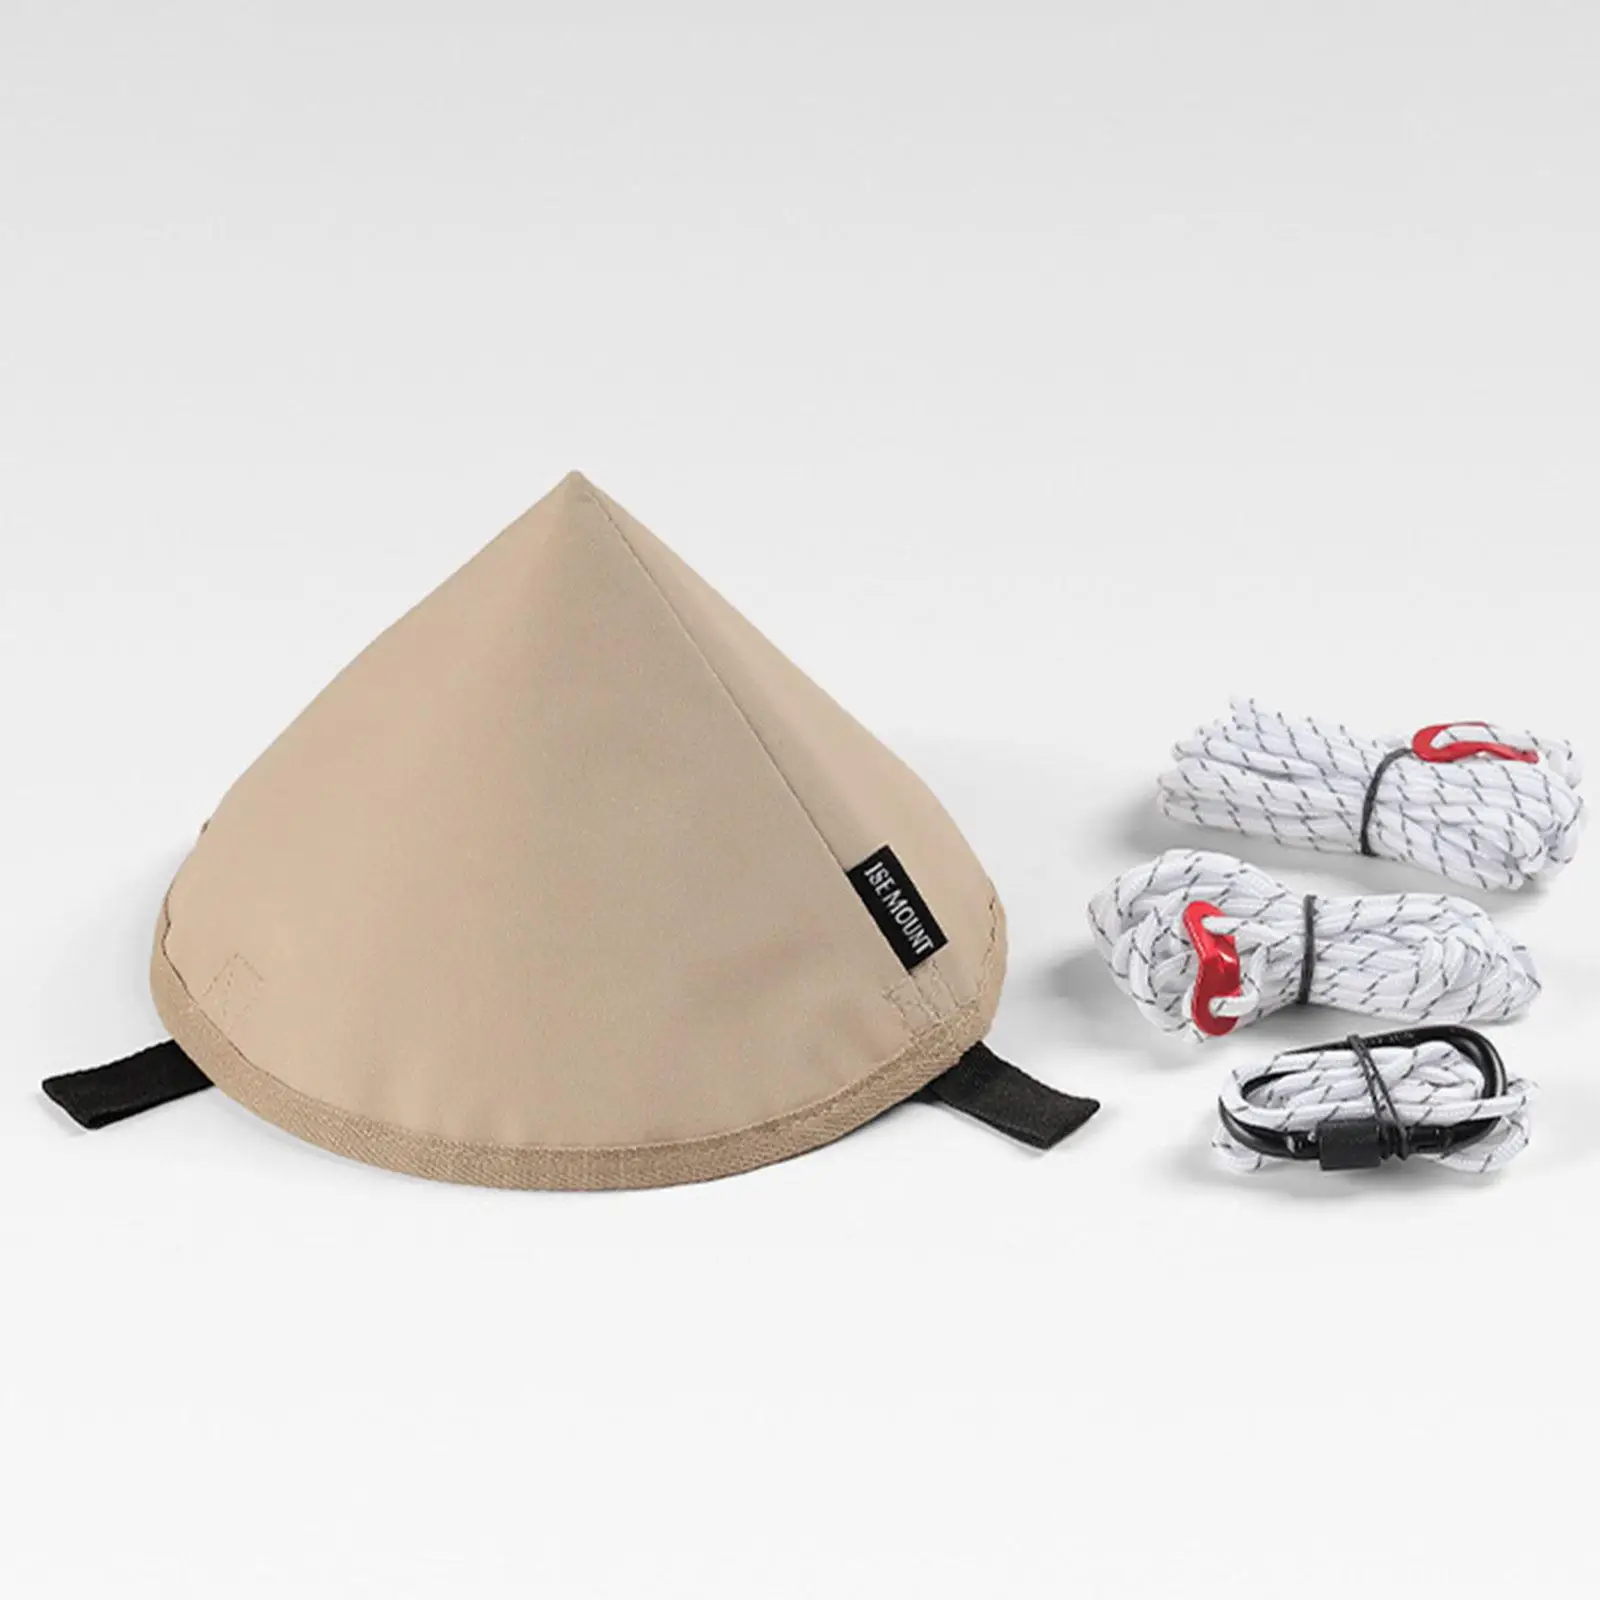 Tent Hat Portable Easy to Set up Tarp Connection Adapter for Canopy Shelter Survival Outdoor Packaging Backpacking Camping